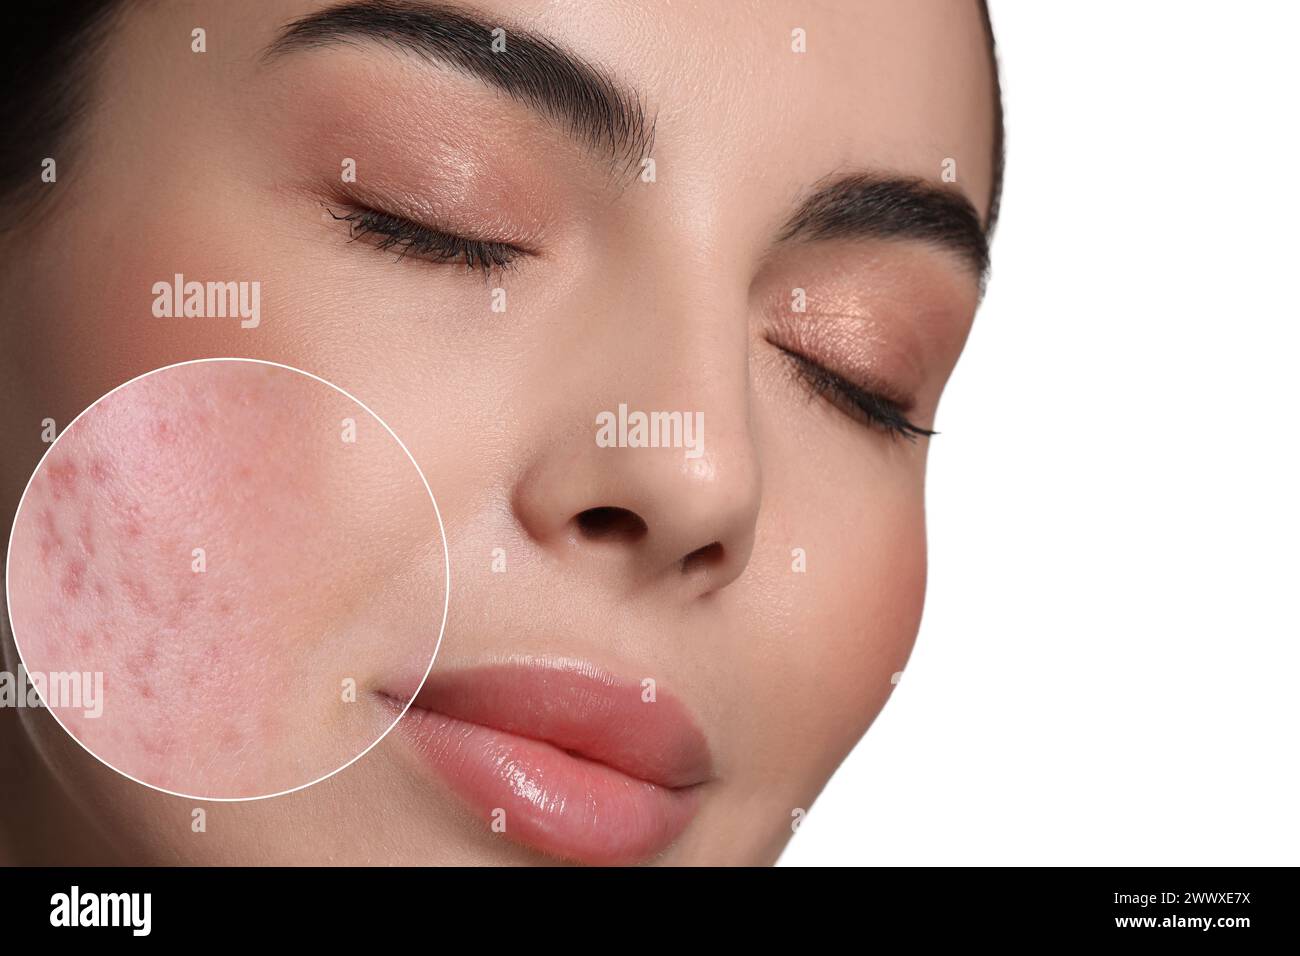 Woman with acne on her face on white background. Zoomed area showing problem skin Stock Photo